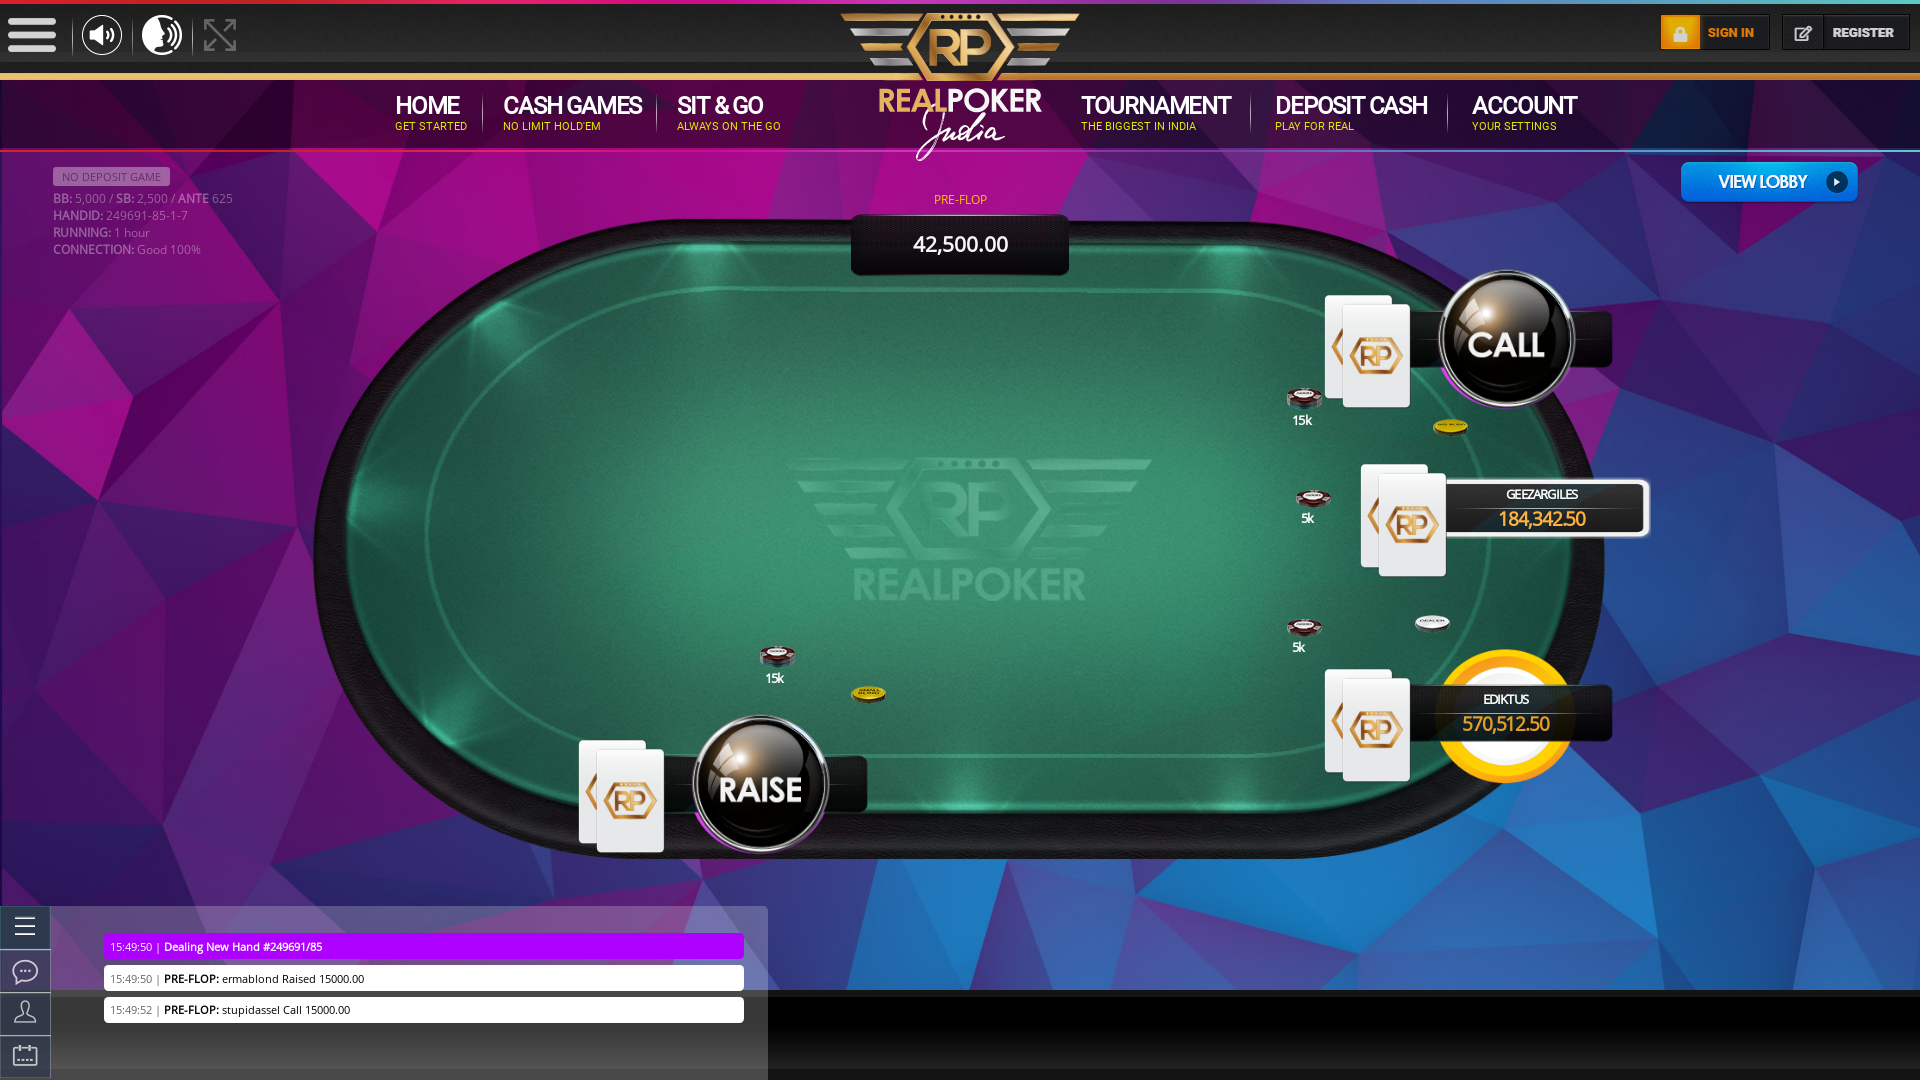 Real poker 10 player table in the 77th minute of the match